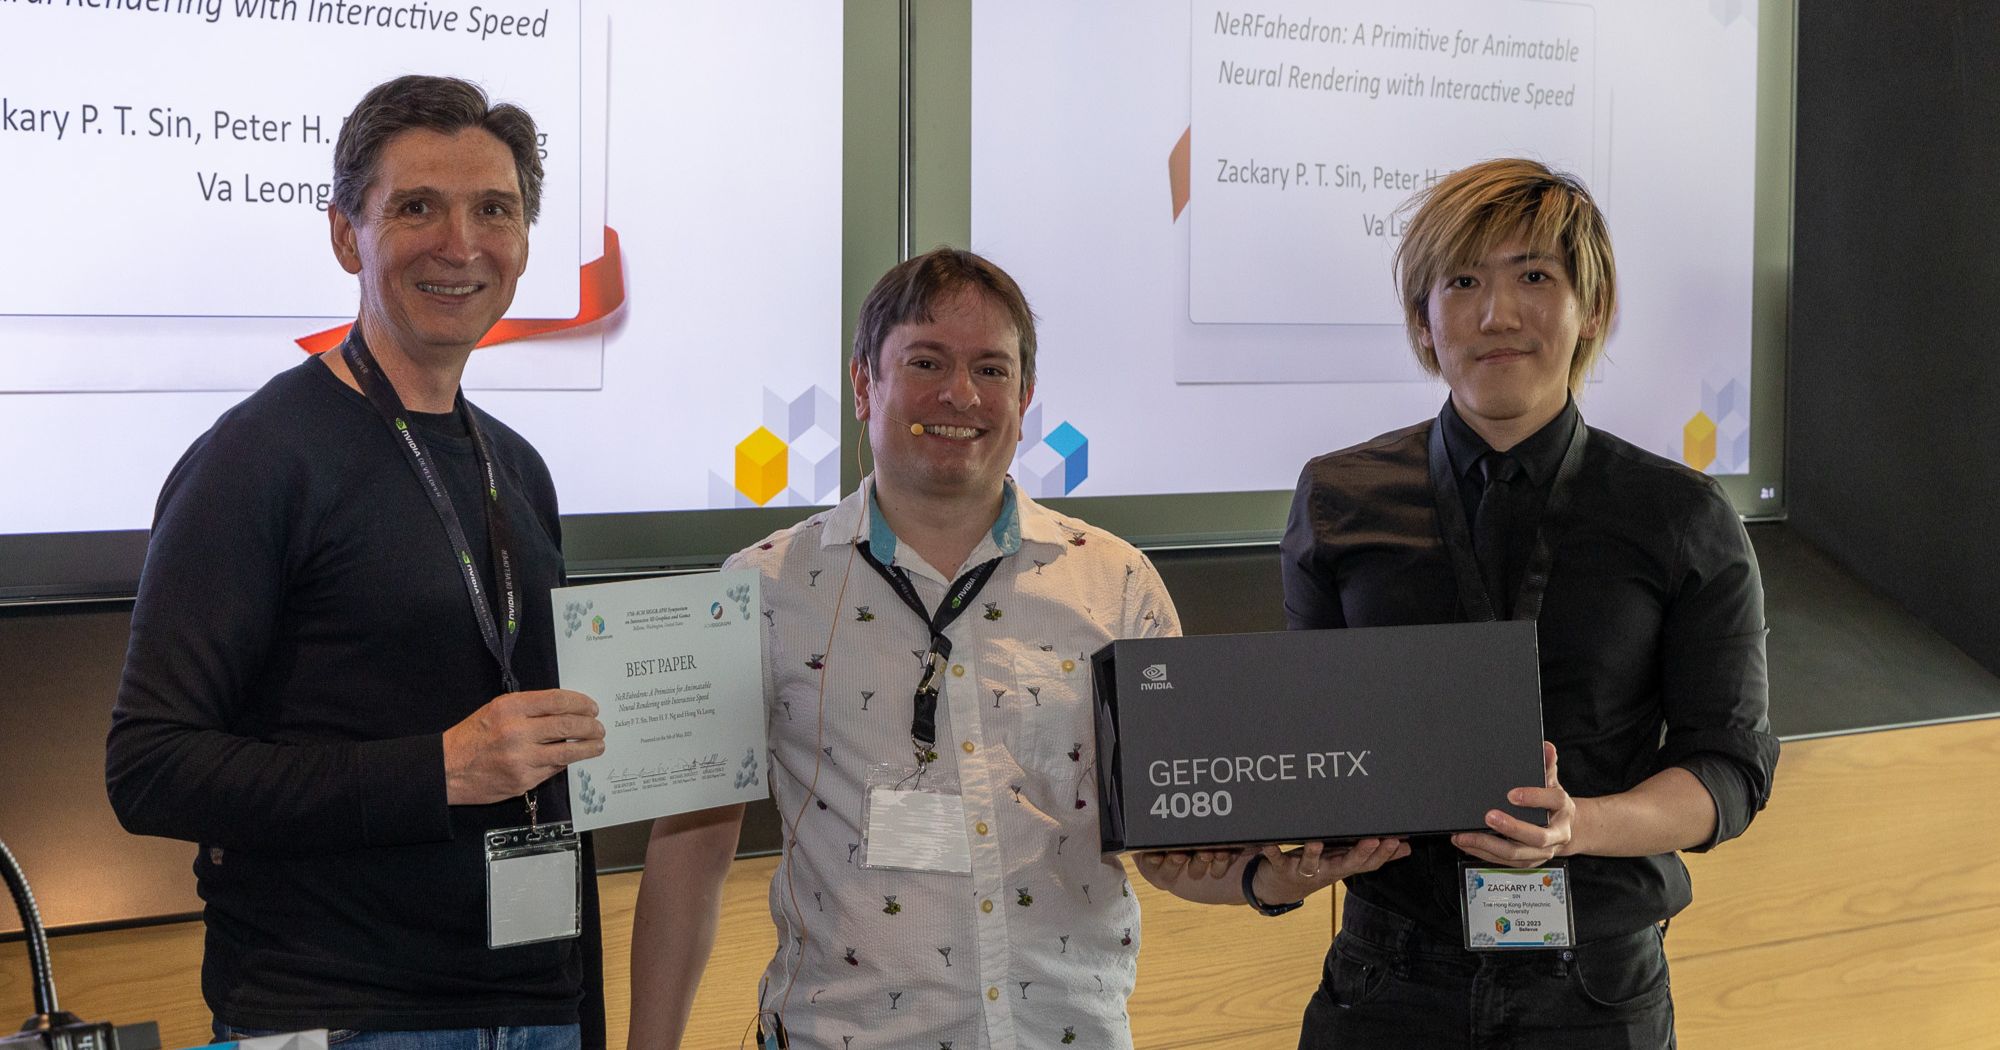 Best Paper Award from ACM SIGGRAPH Symposium on Interactive 3D Graphics